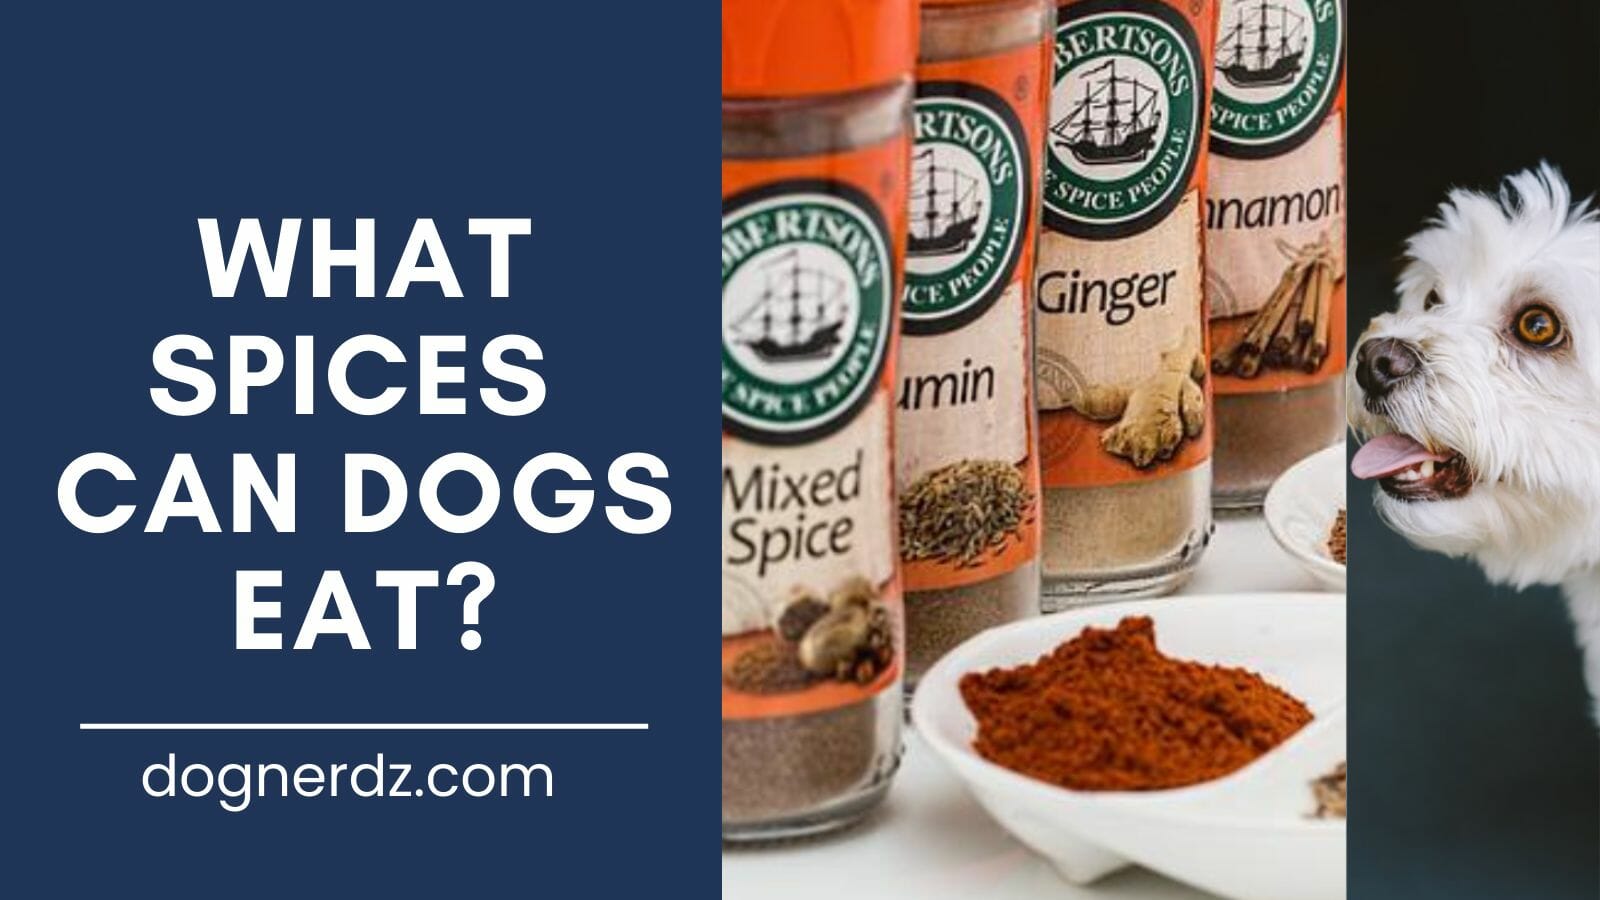 what spices can dogs eat?